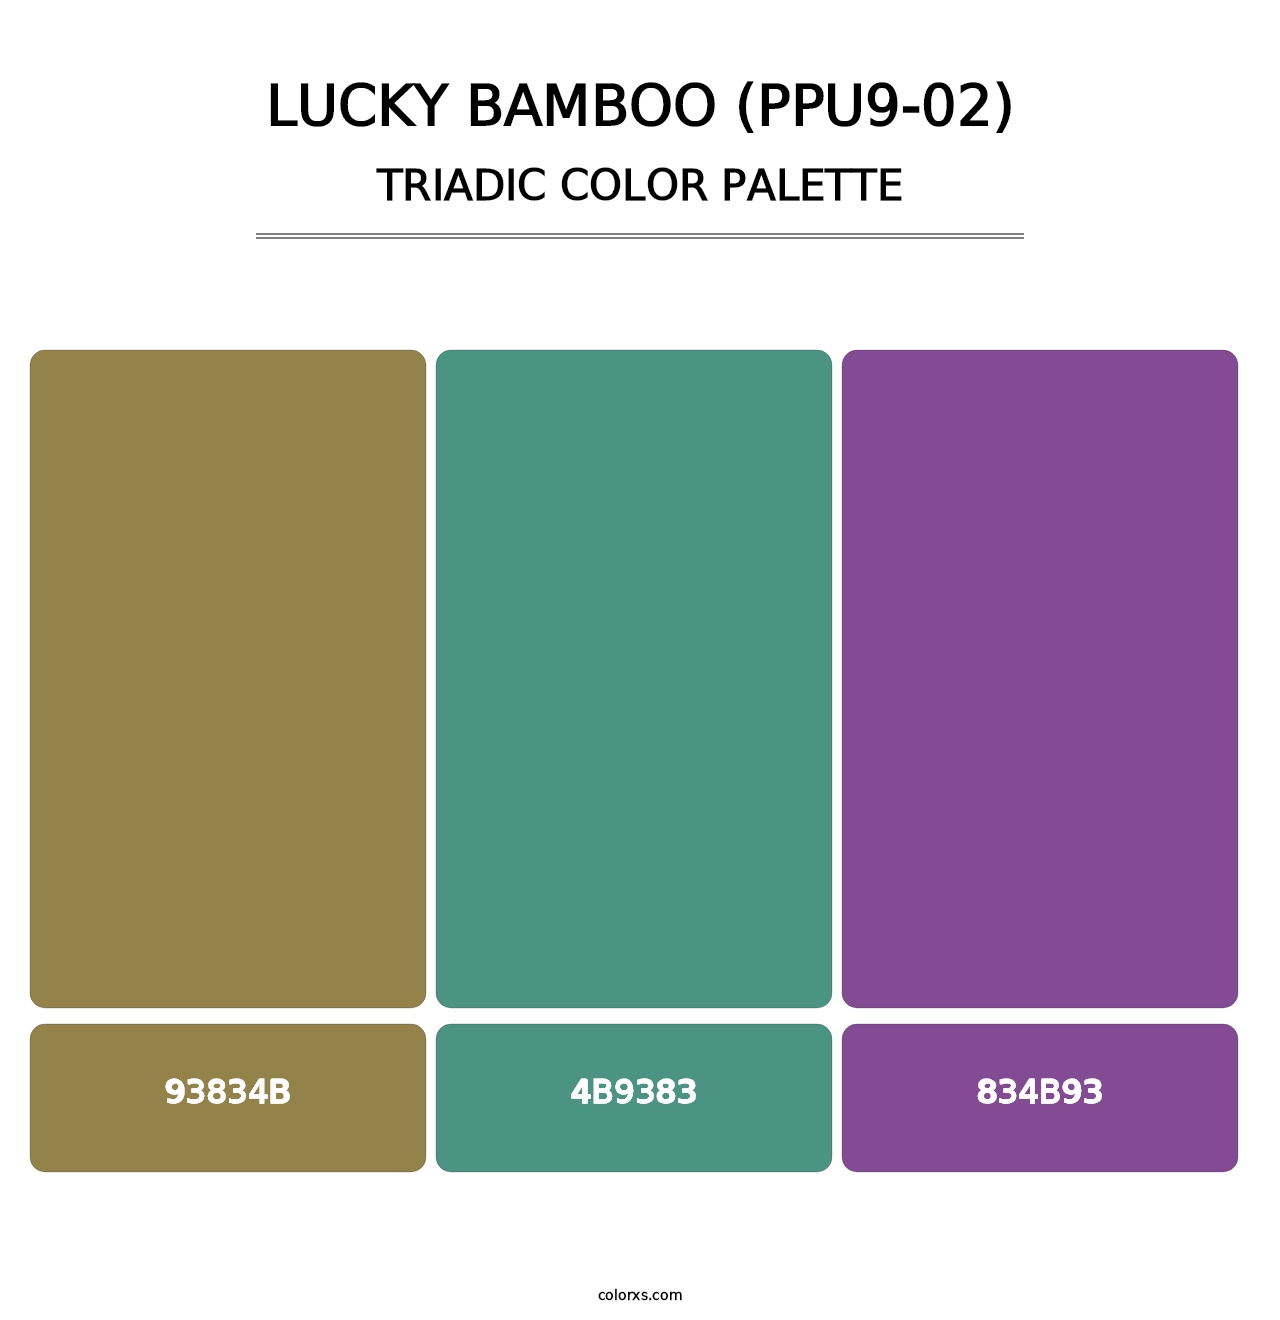 Lucky Bamboo (PPU9-02) - Triadic Color Palette